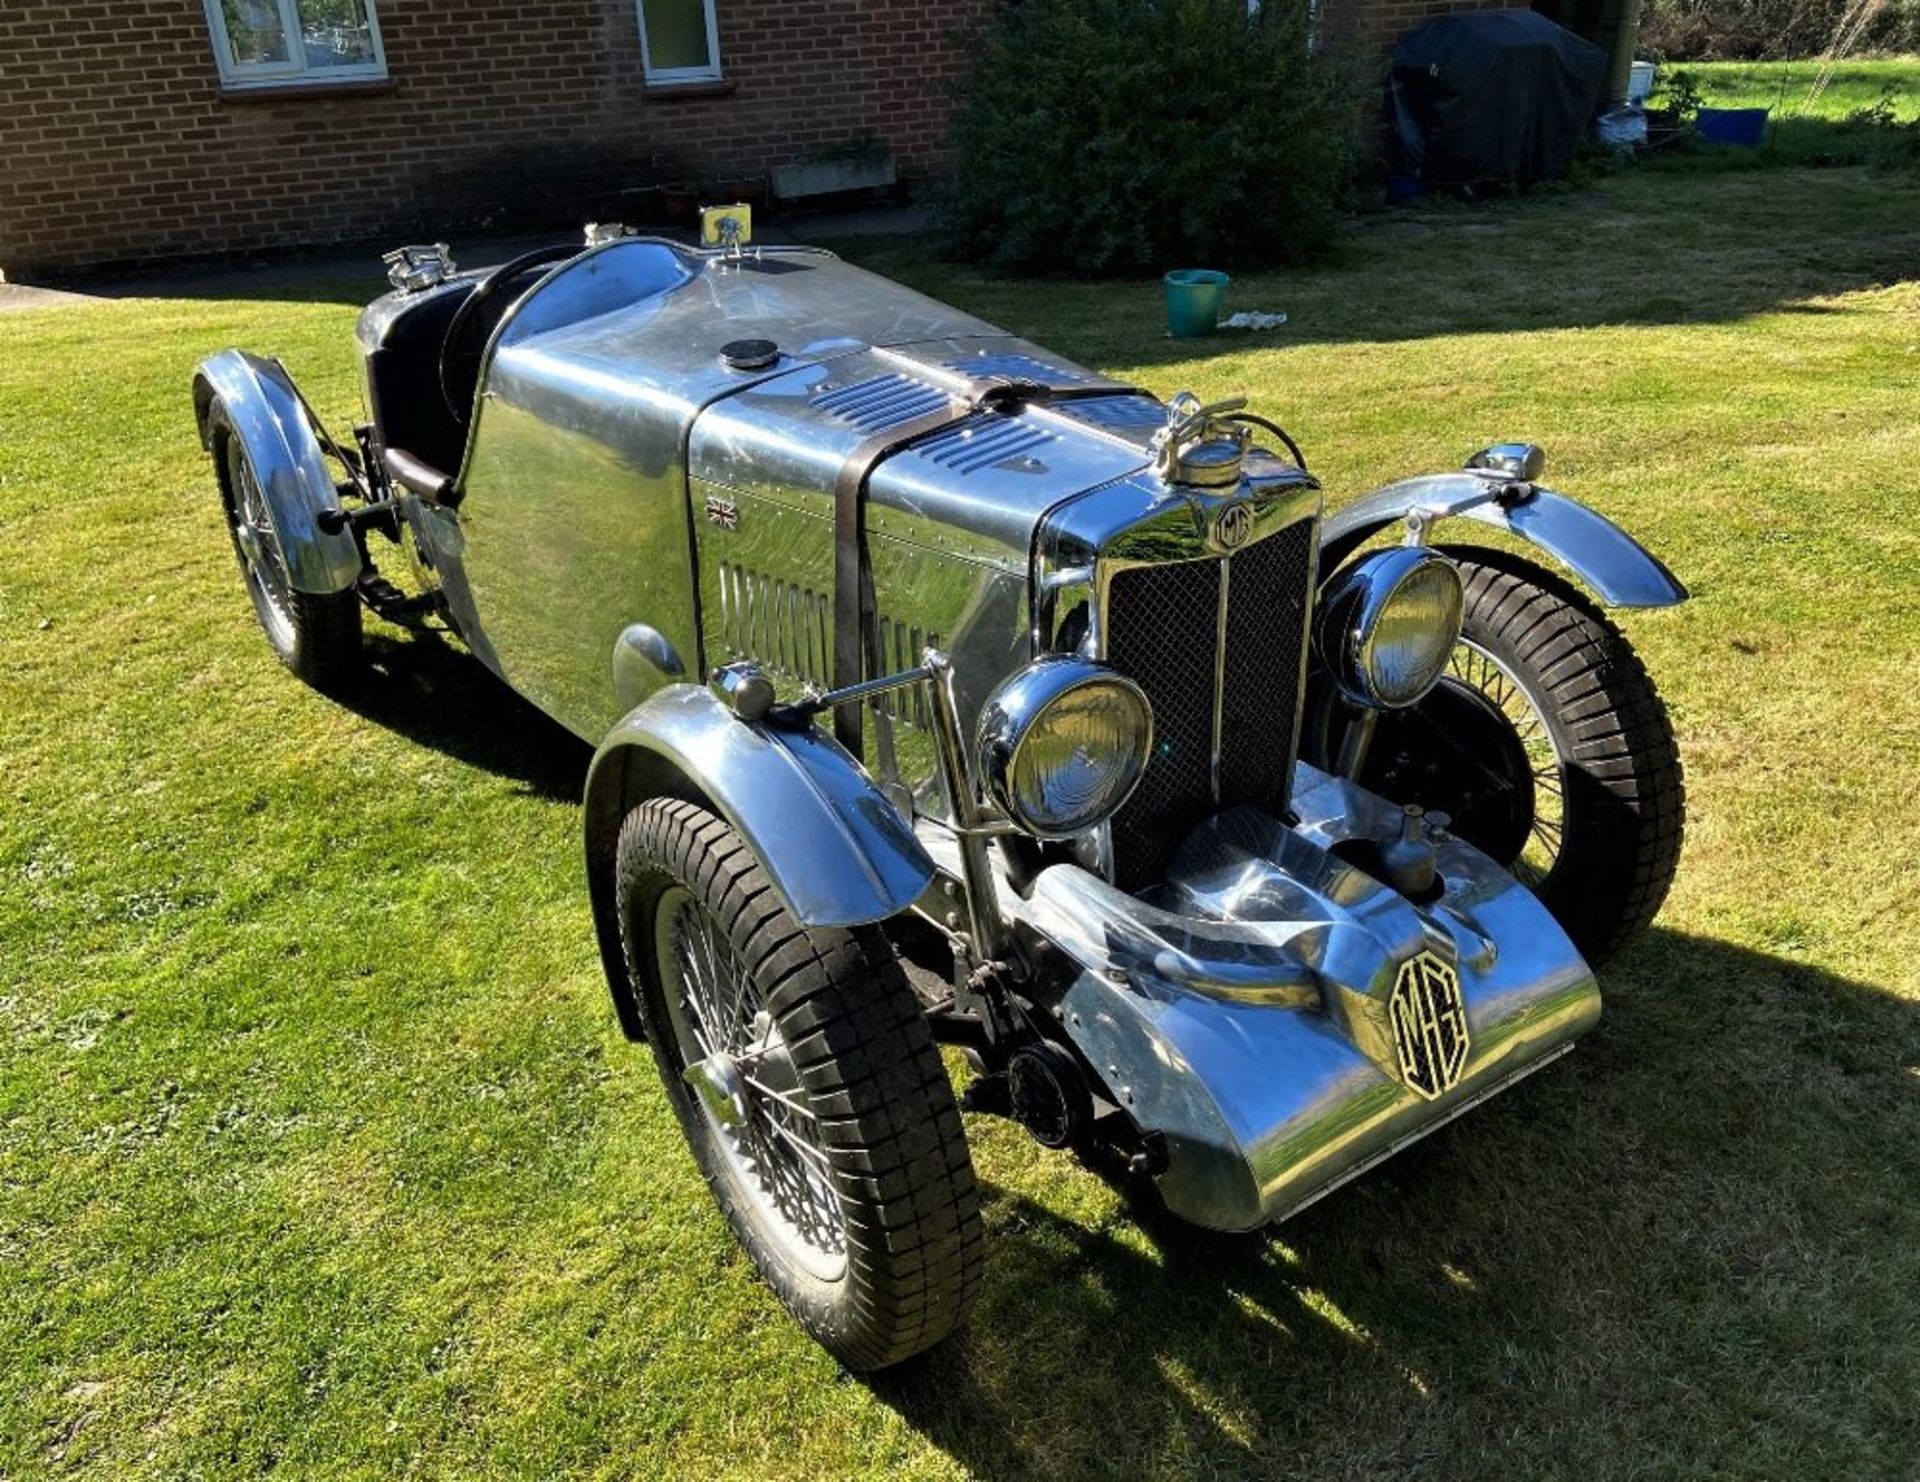 MG Q-TYPE RECREATION Registration Number: MG 5640 Chassis Number: F1221 Recorded Mileage: TBA - - Image 3 of 11